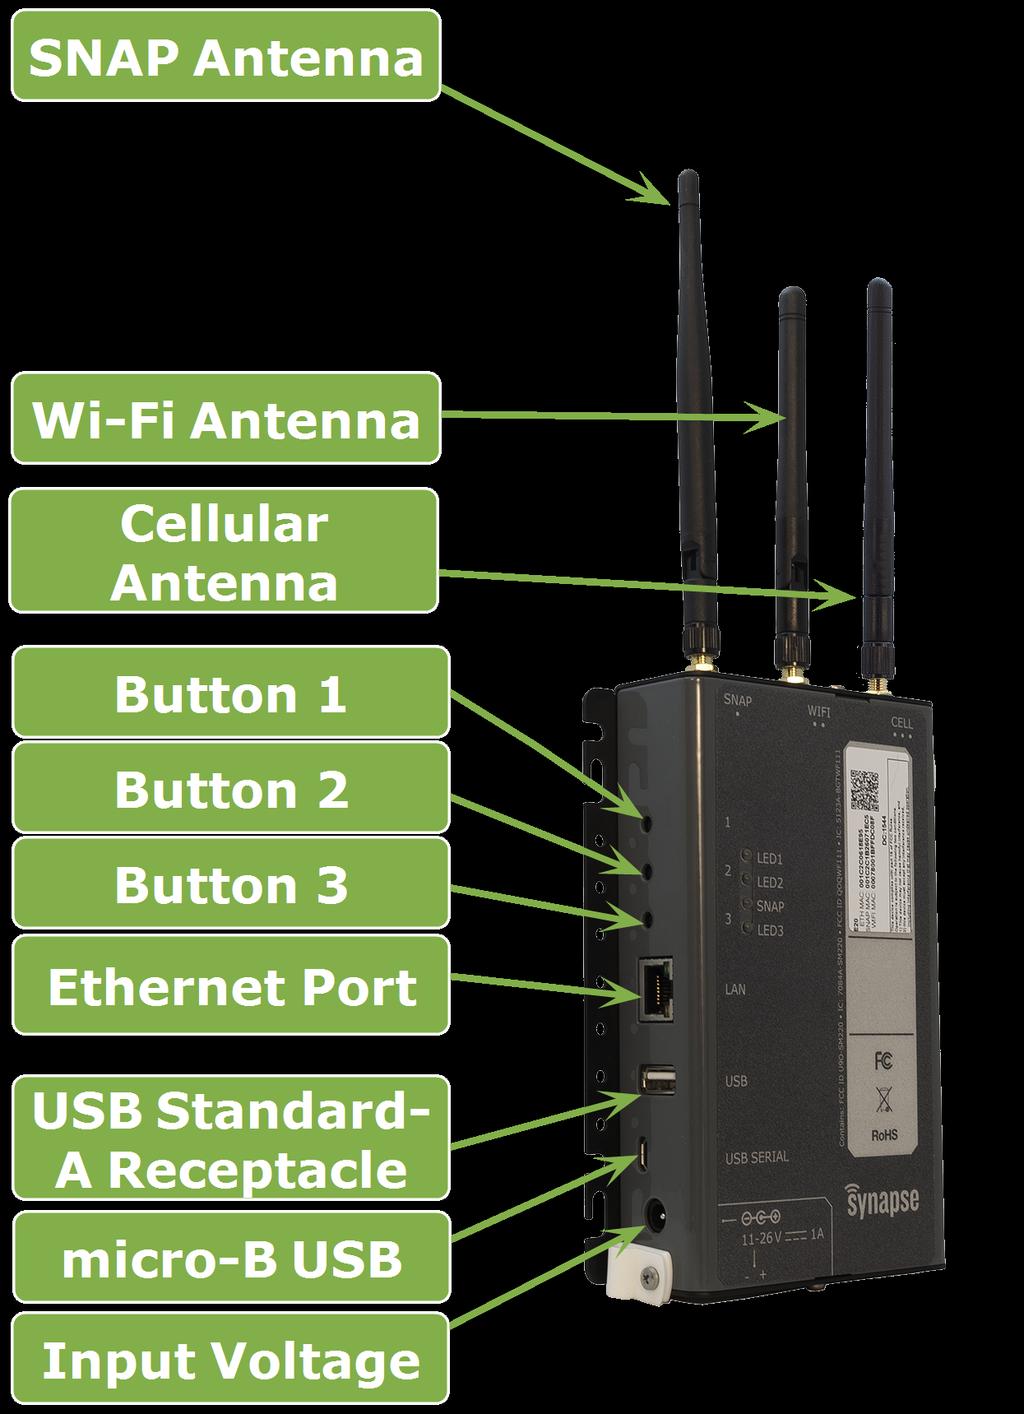 To install the NorthStar site controller: 1. Unpack the NorthStar Site Controller. 2. Attach the included antennas to the site controller as shown.